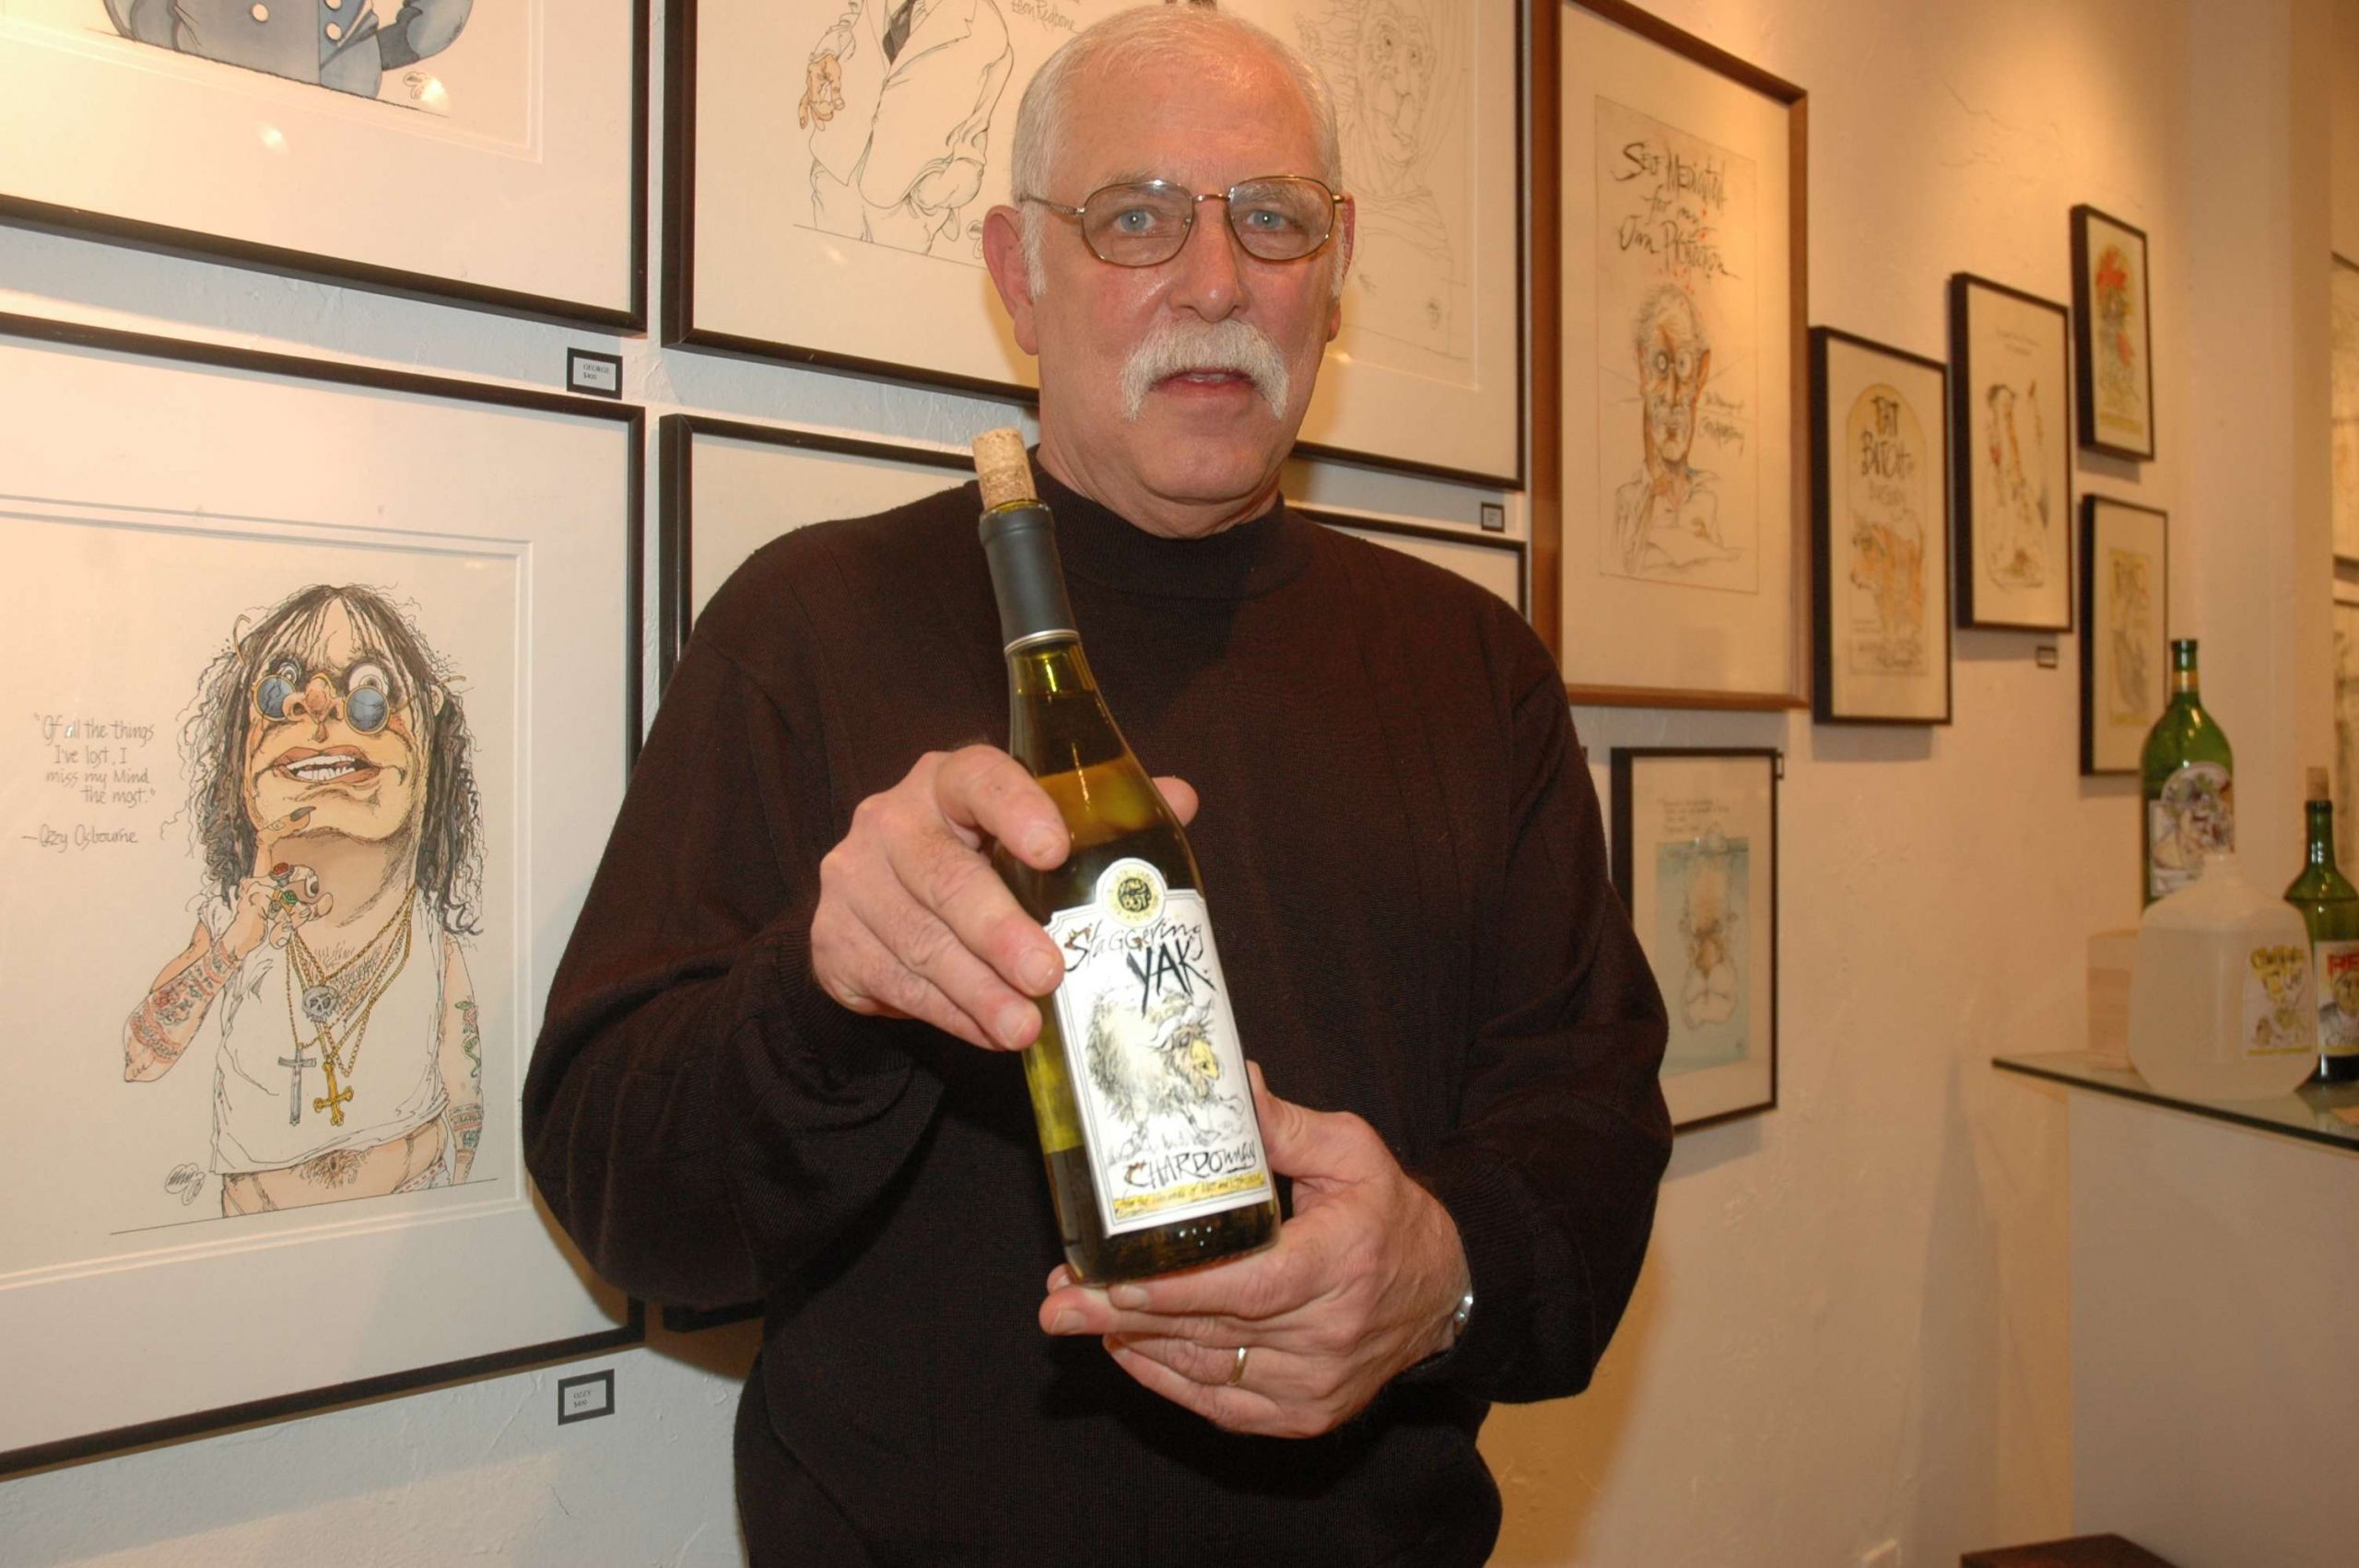 Armstrong's illustrations were not just for printed magazines, either. At a gallery in 2008 where his artwork was featured, he displays a bottle that contained his illustrations and several framed prints behind him that were collectors' items among his fans. Chris, thank you for your work and your friendship through all the years. We'll miss you.